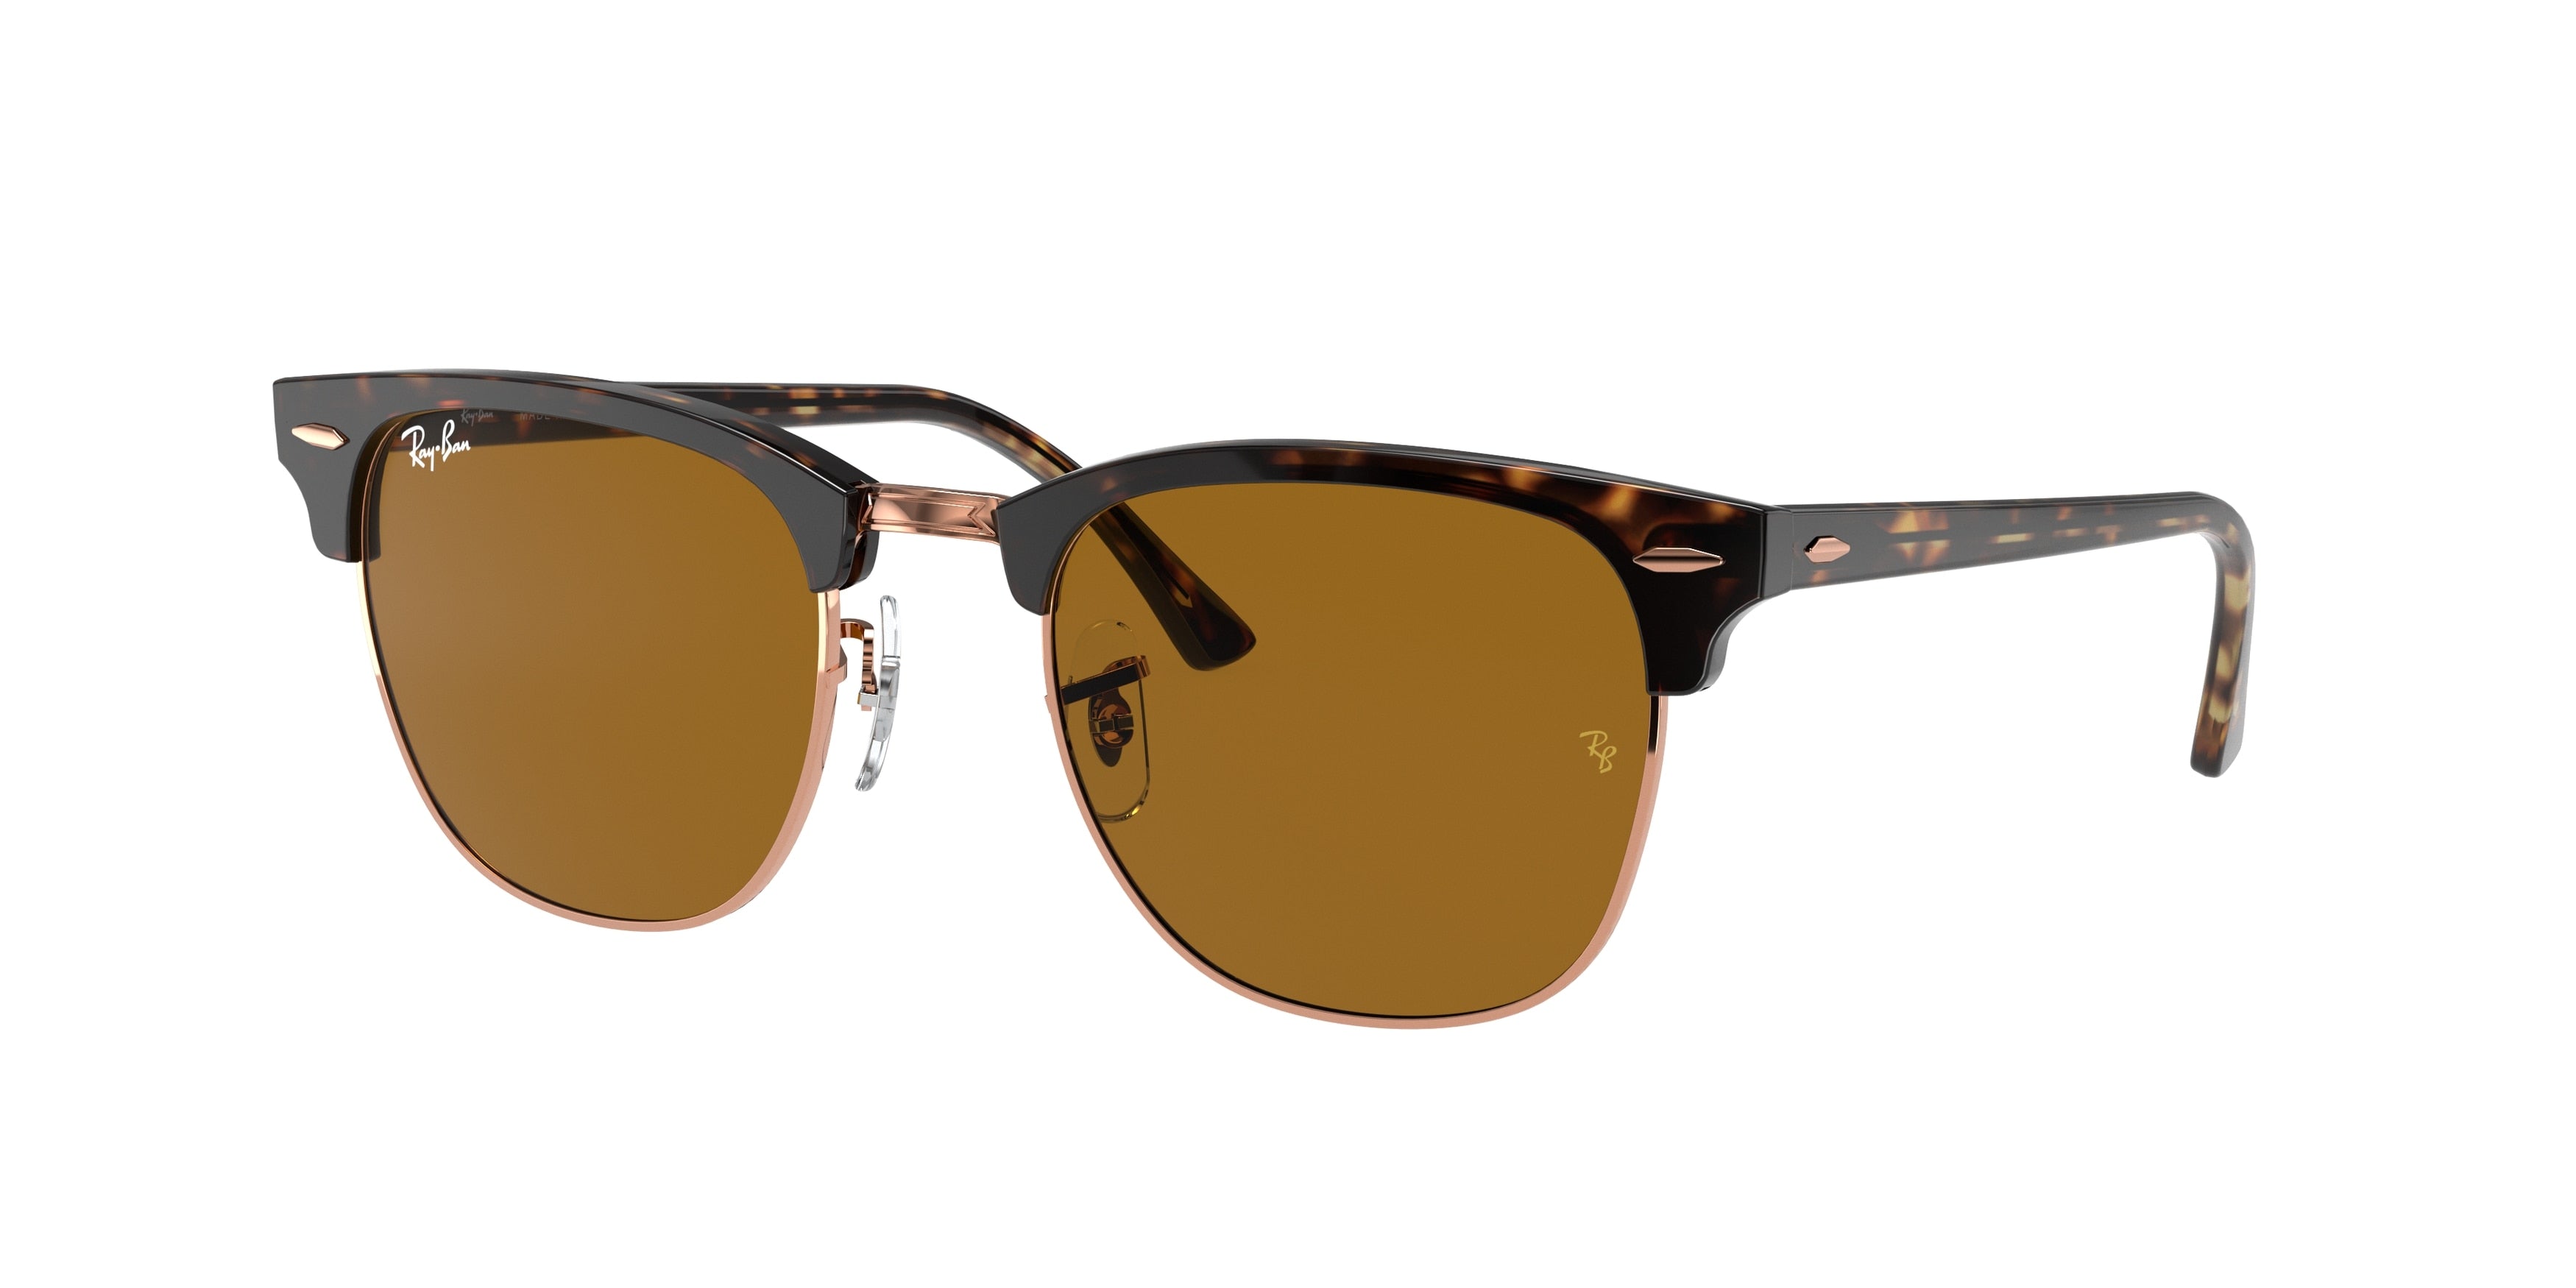 Ray-Ban CLUBMASTER RB3016 Square Sunglasses  130933-Havana 50-145-21 - Color Map Tortoise